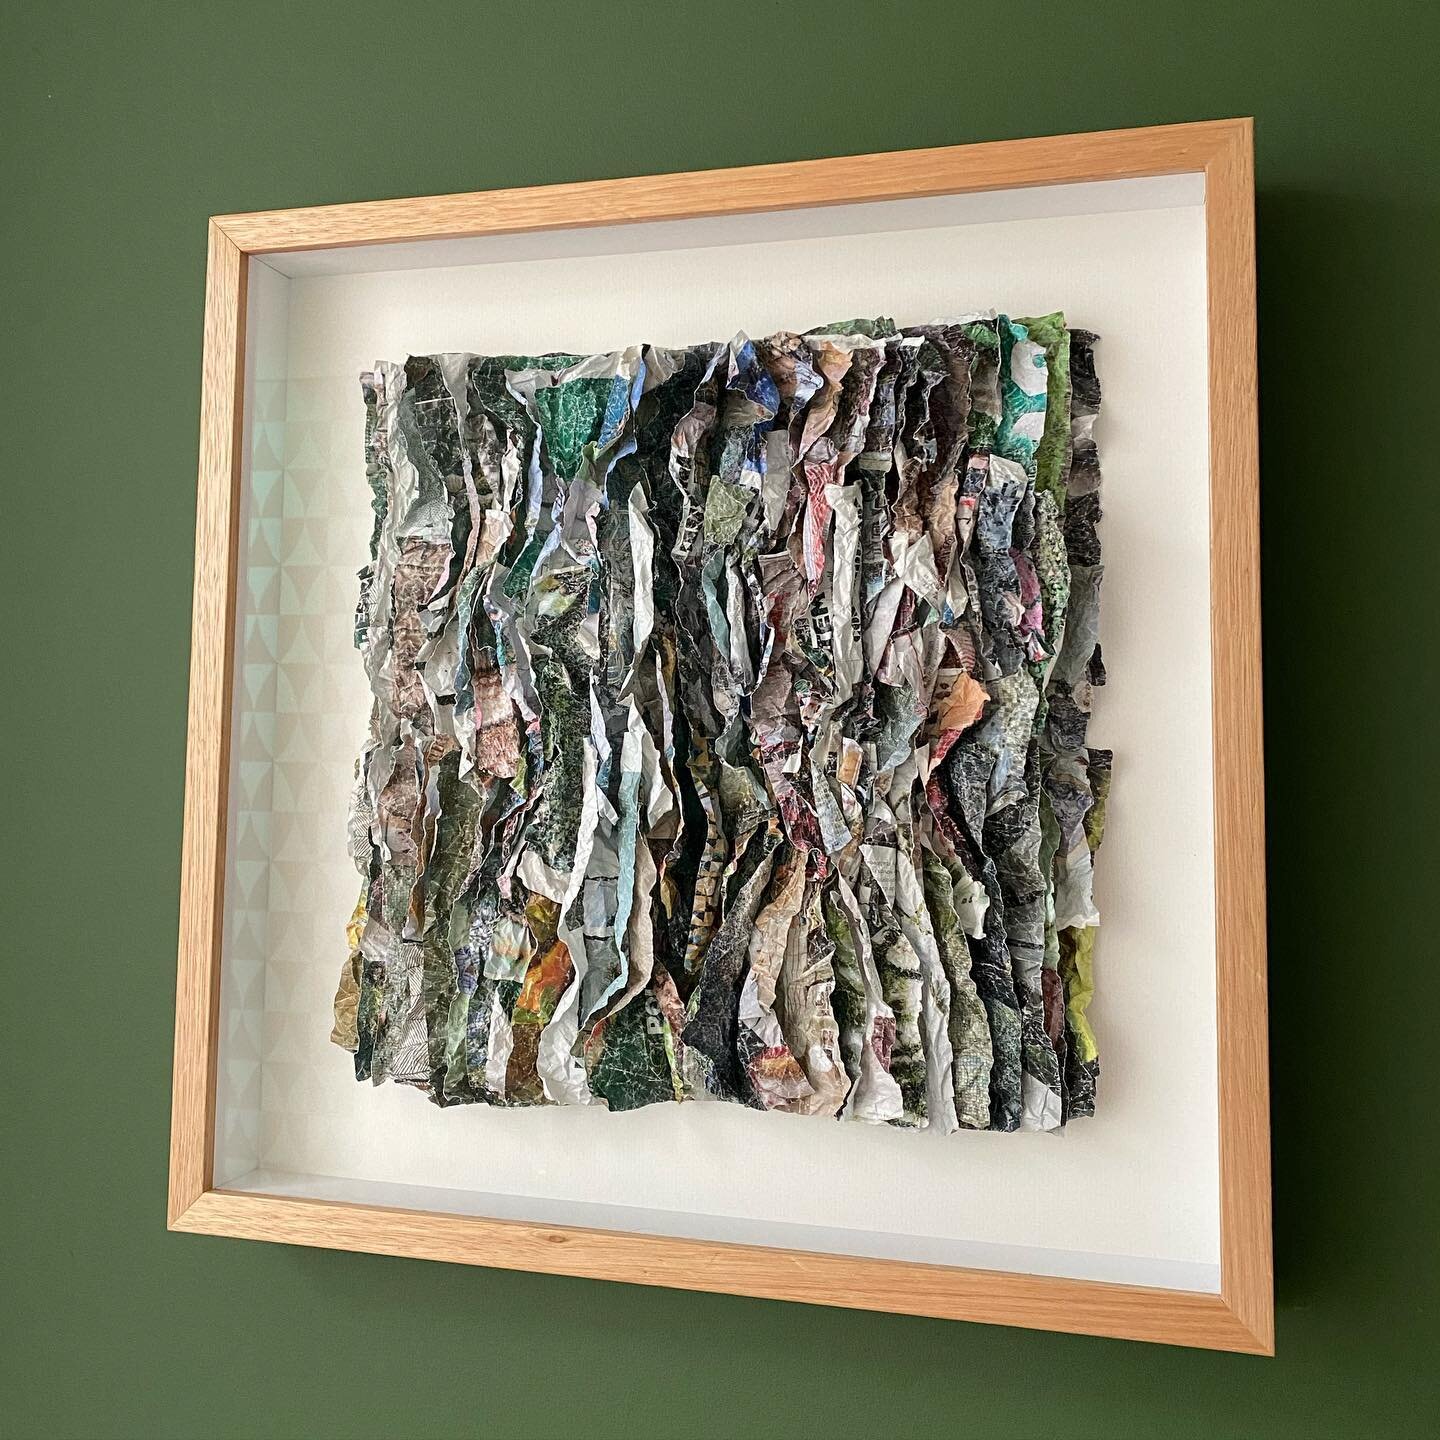 Glossy Greens by @diormahnkenstudio &hellip;.as it happens I am very chuffed to have this hanging on my @porters maidenhair wall. Another of her many beautiful works with paper.
 

#interiordesign #interiorstyling #artonpaper #diormahnkenstudio